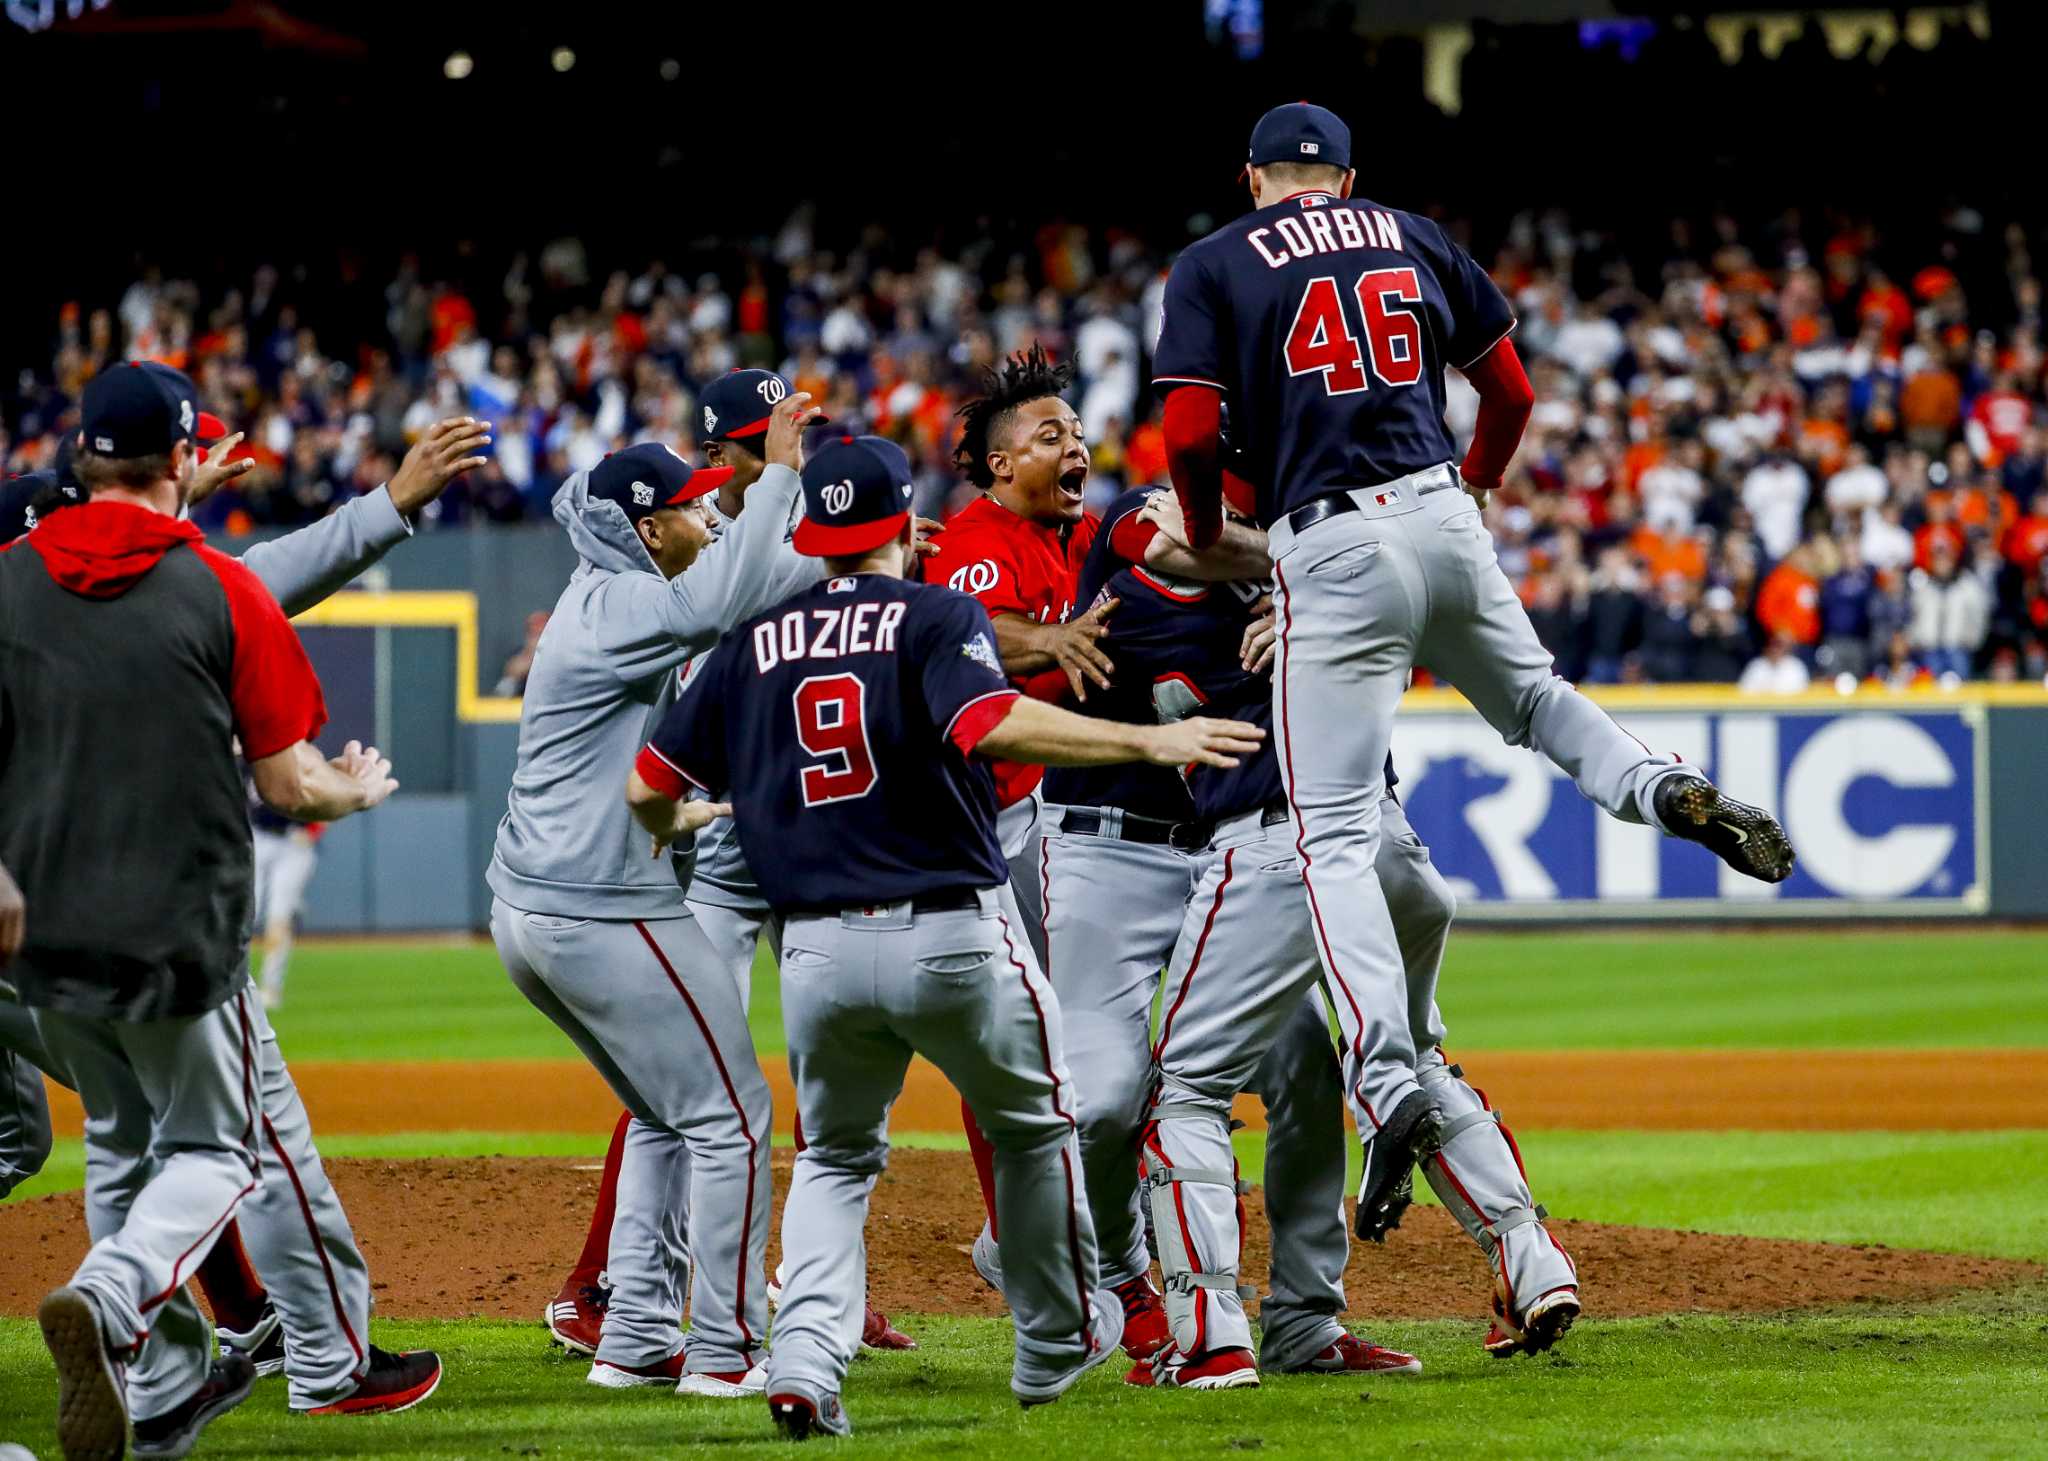 End of the road: Nationals beat Astros in Game 7 to win World Series